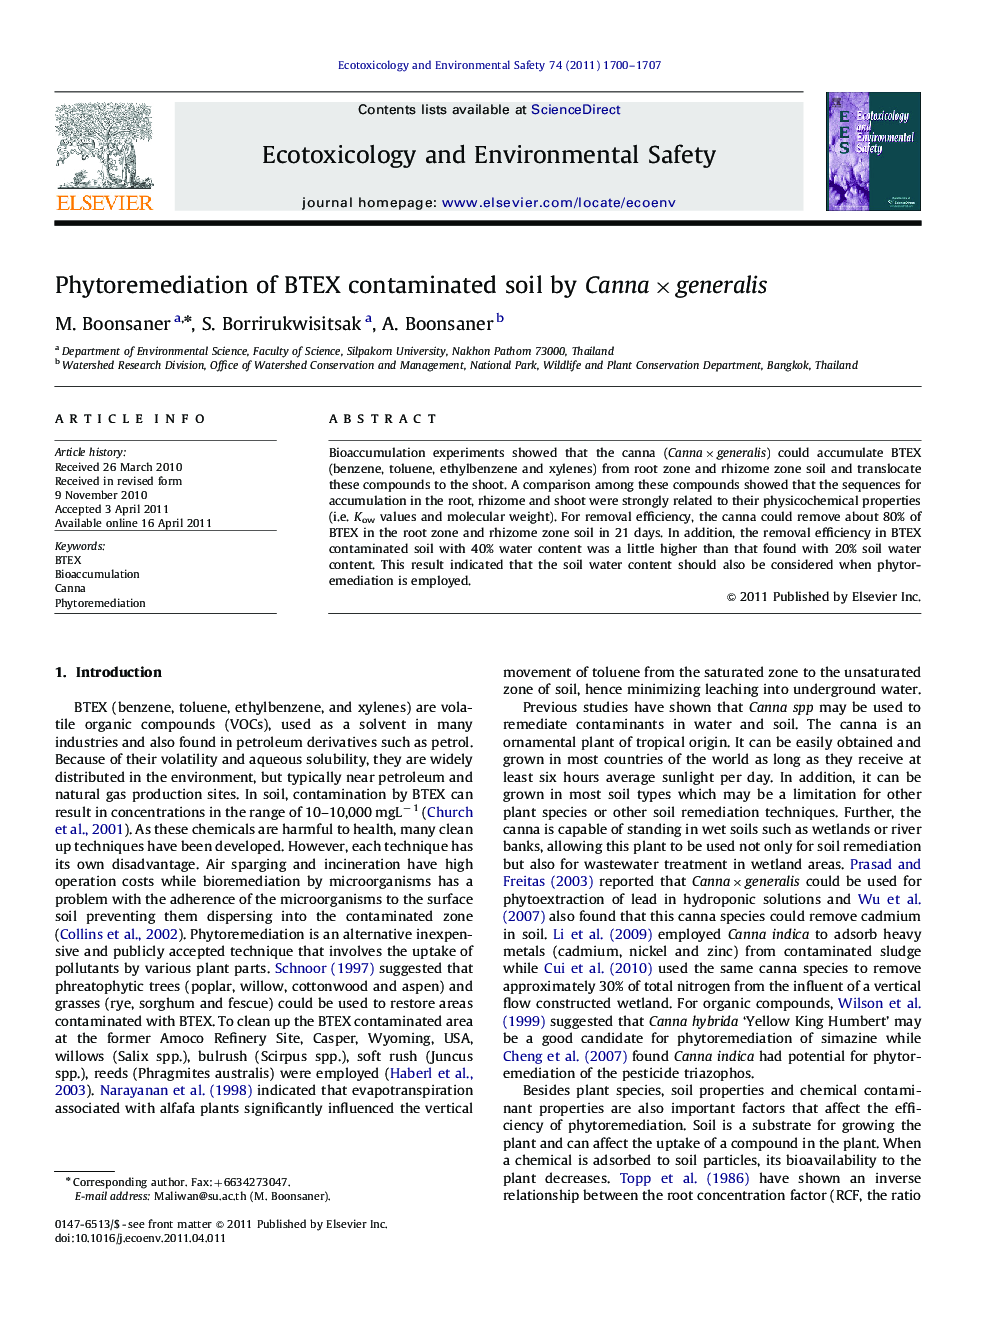 Phytoremediation of BTEX contaminated soil by Canna×generalis